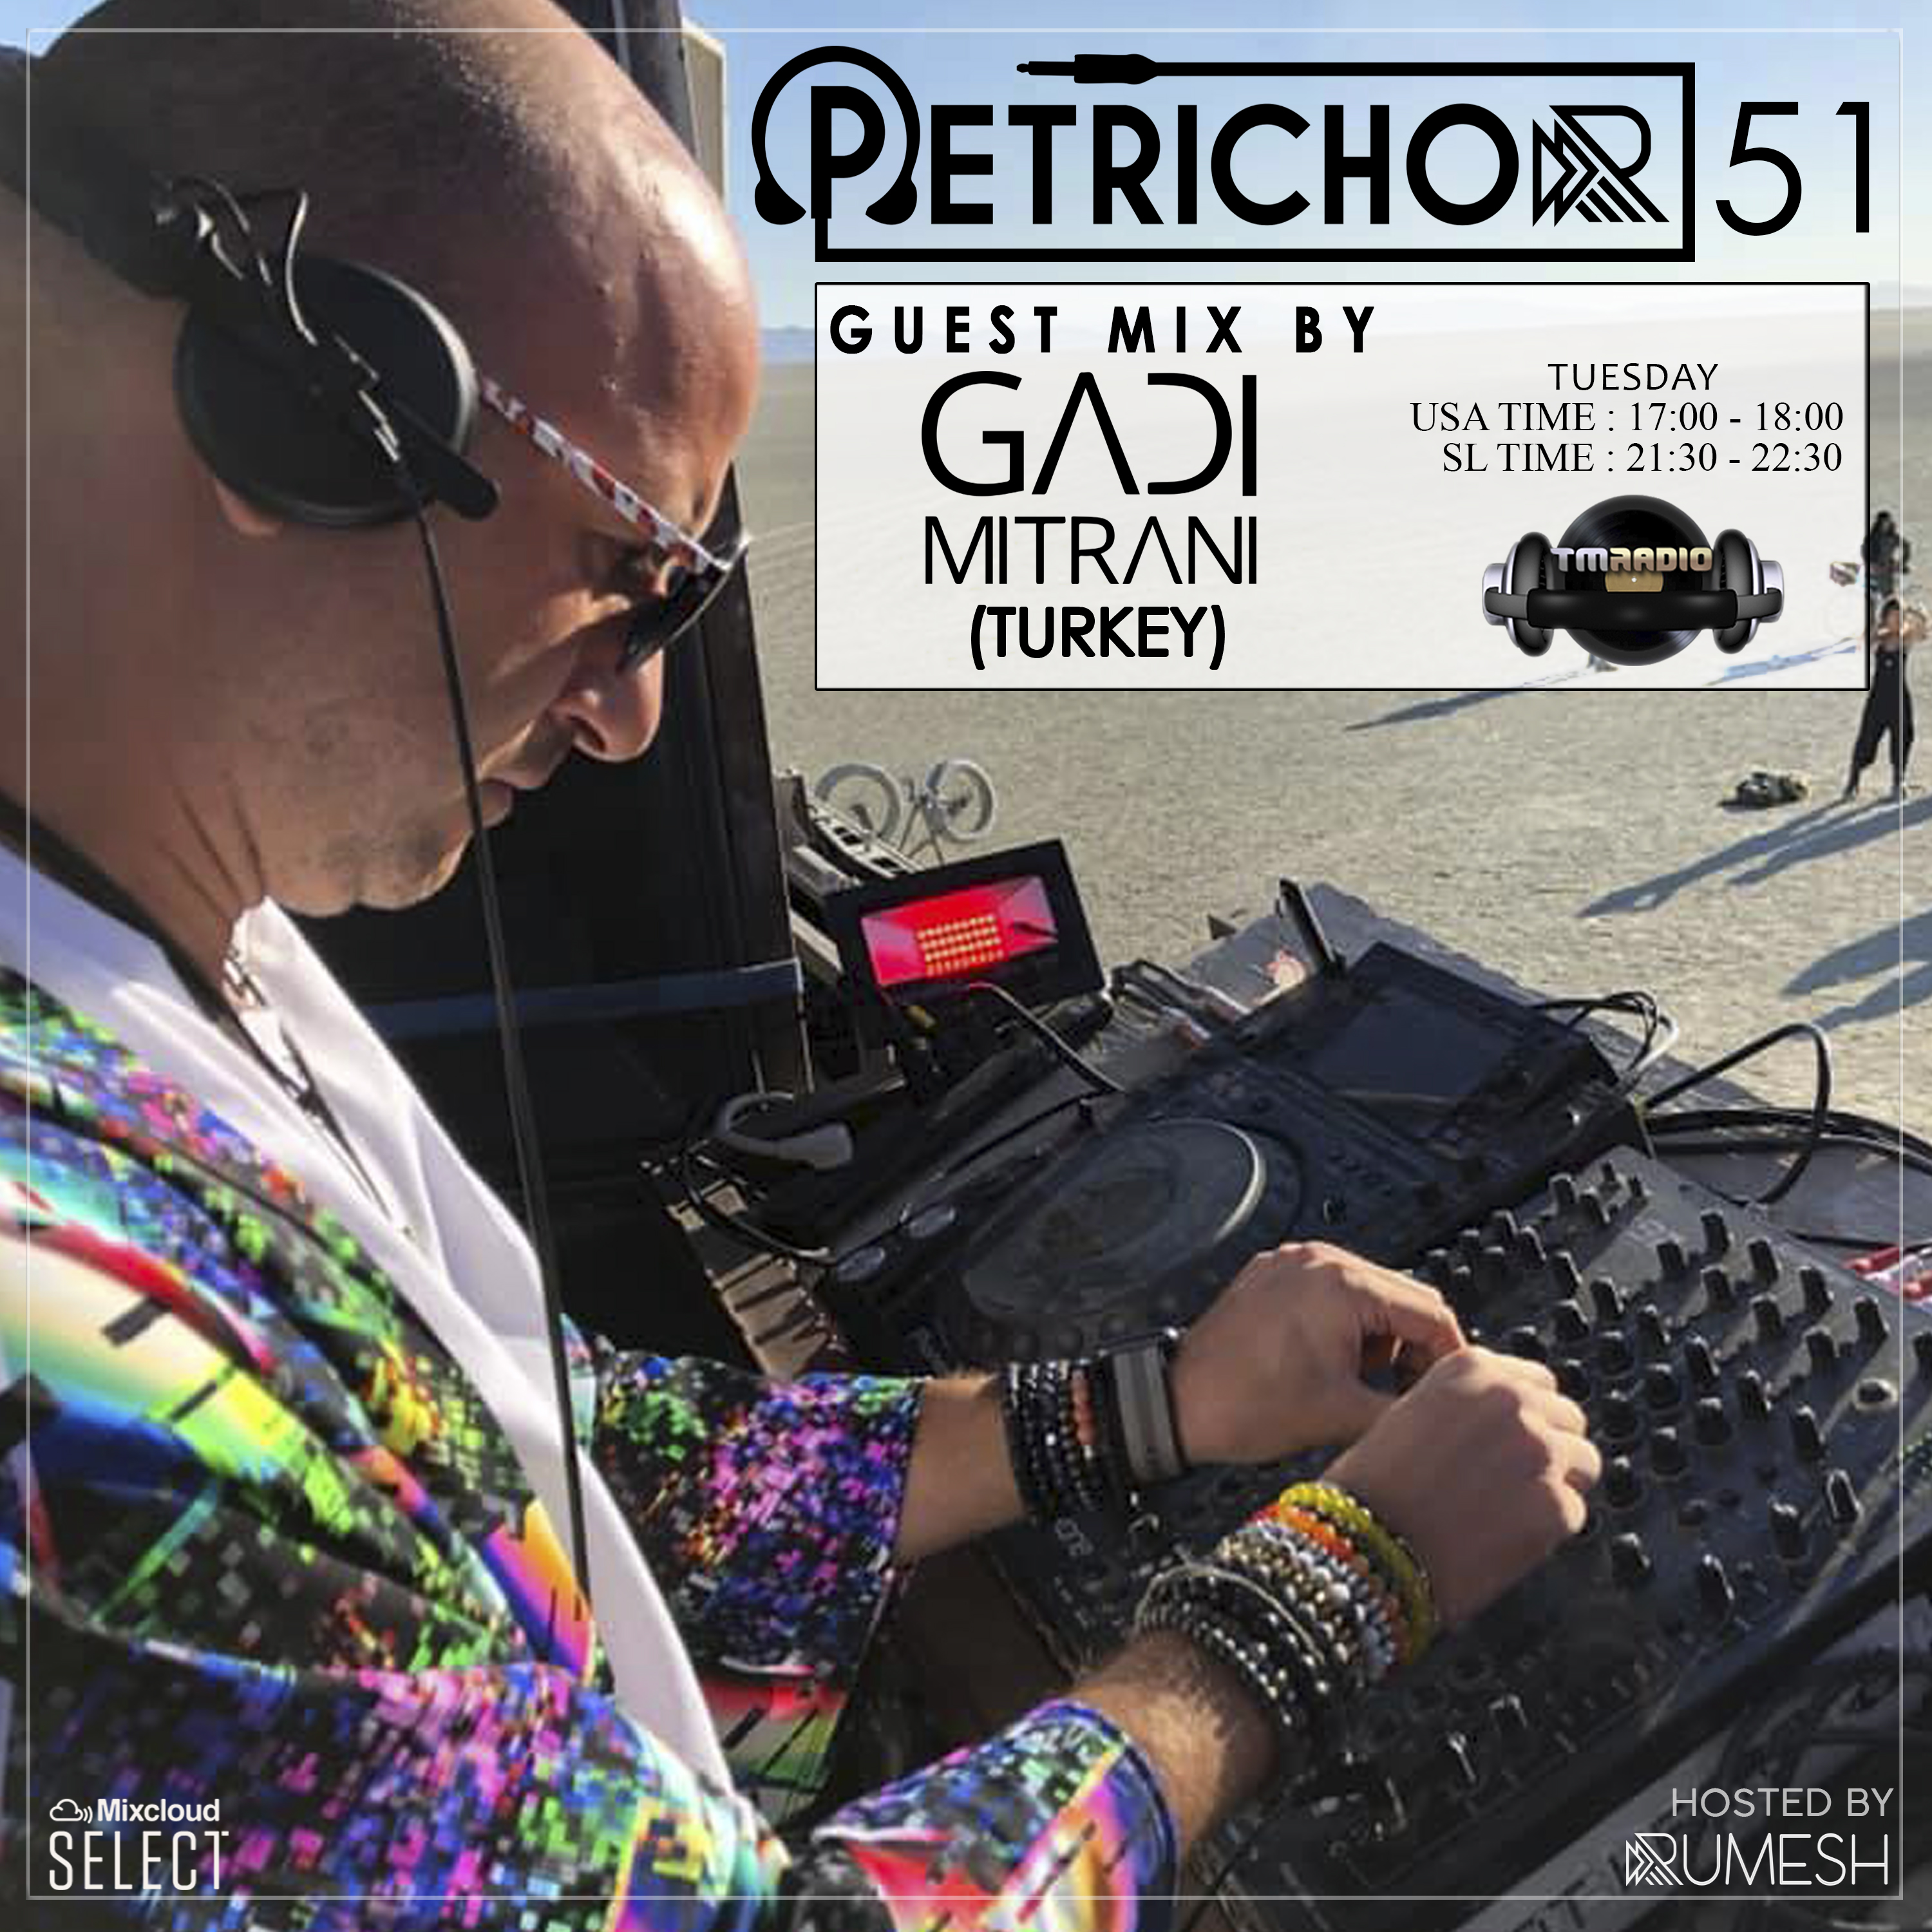 Petrichor :: Petrichor 51 guest mix by Gadi Mitrani (Turkey) (aired on October 29th, 2019) banner logo